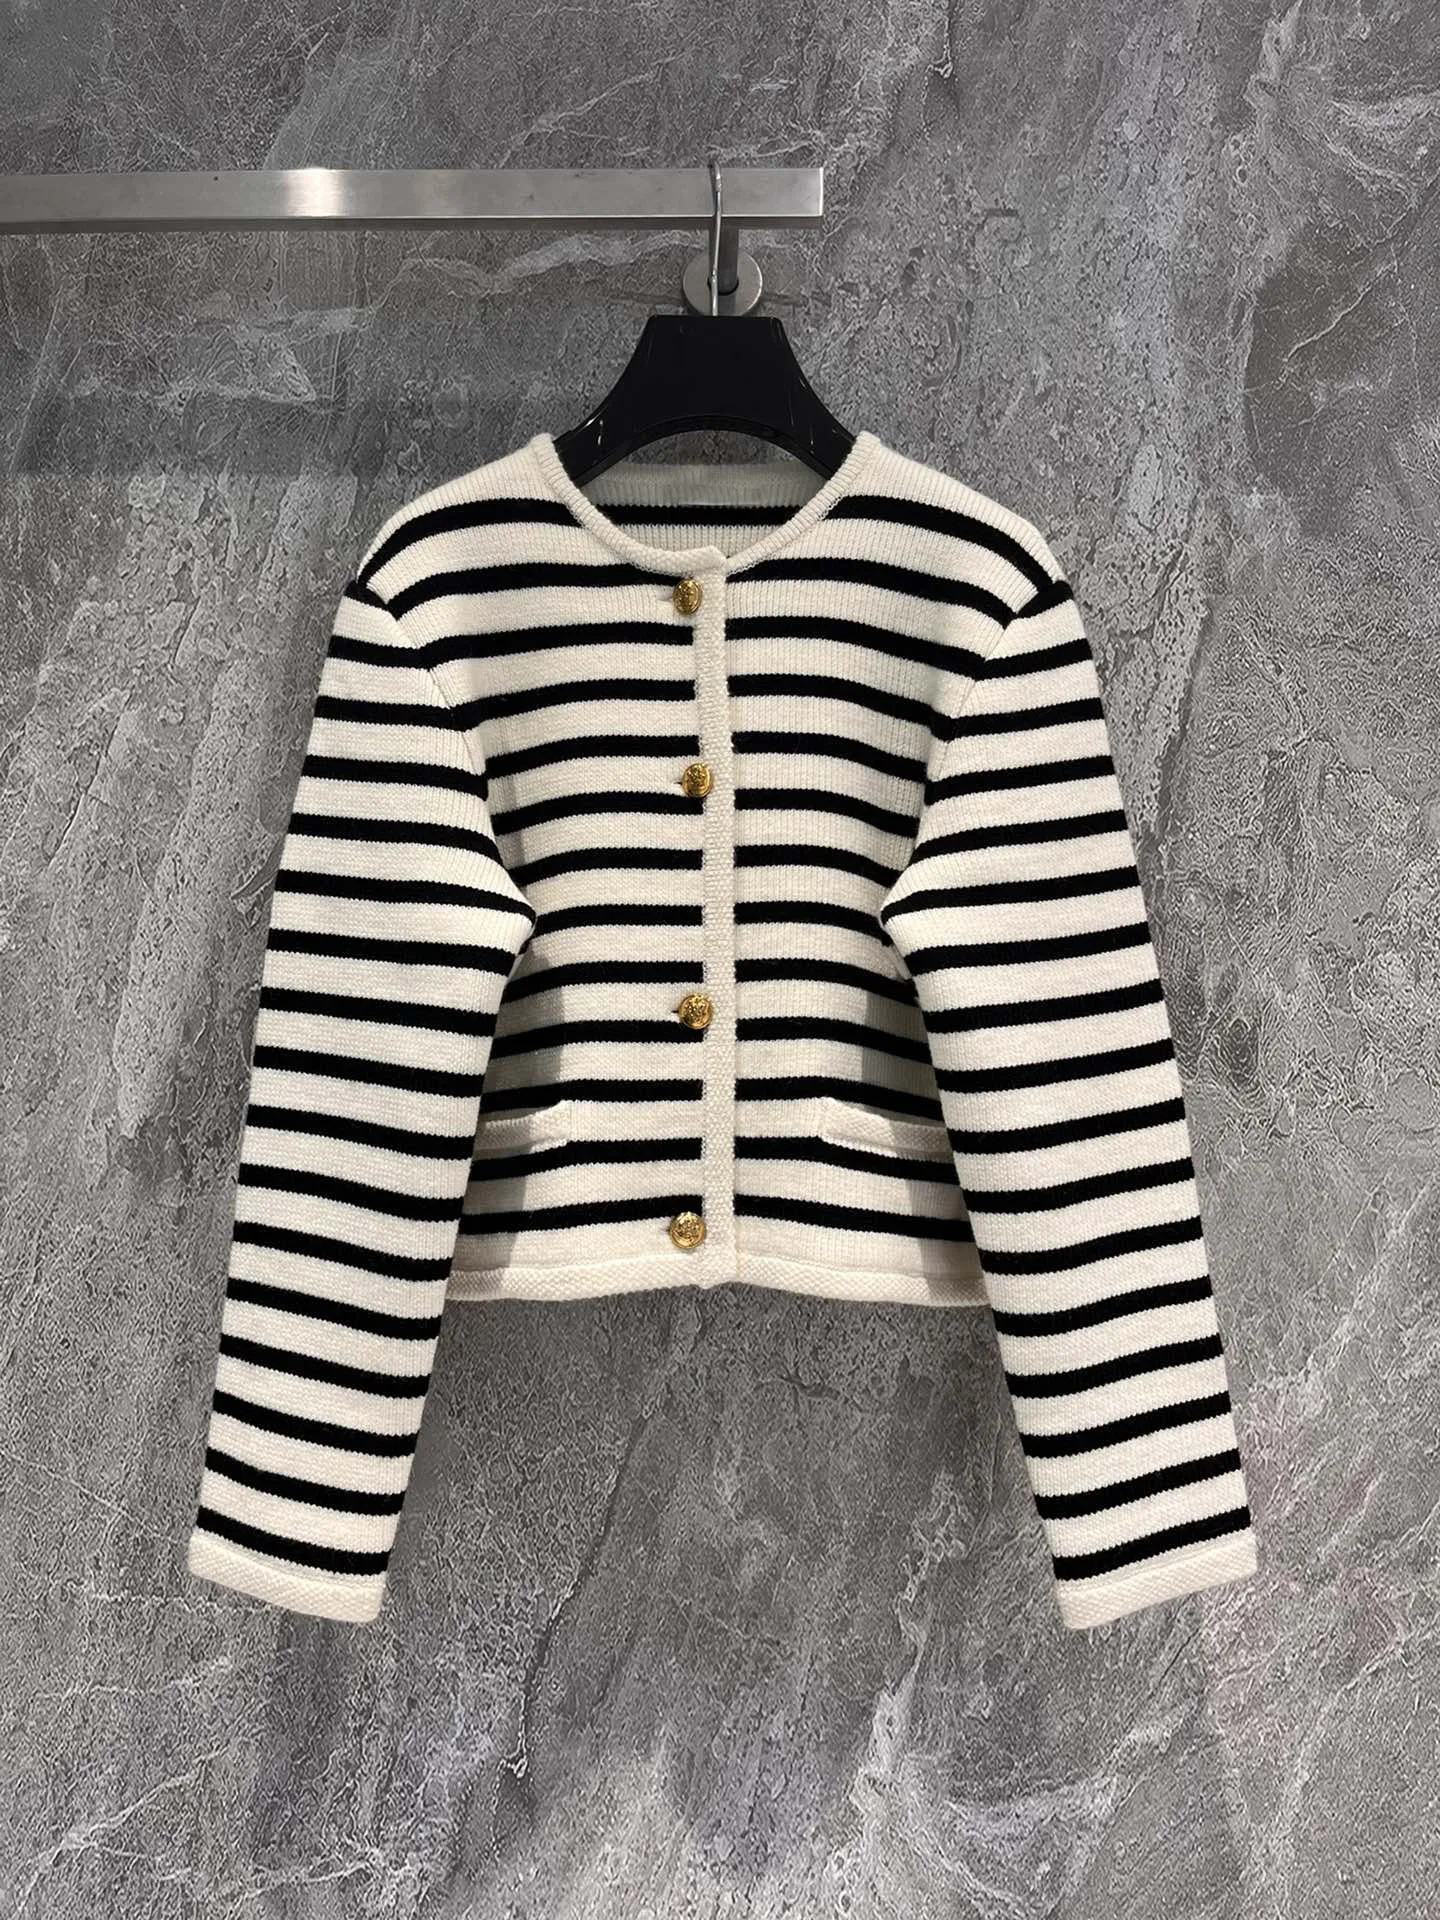 

2023 Women's Clothing High Quality Striped 70% Wool Cardigans Coat Female Chic SweaterAutumn Winter New